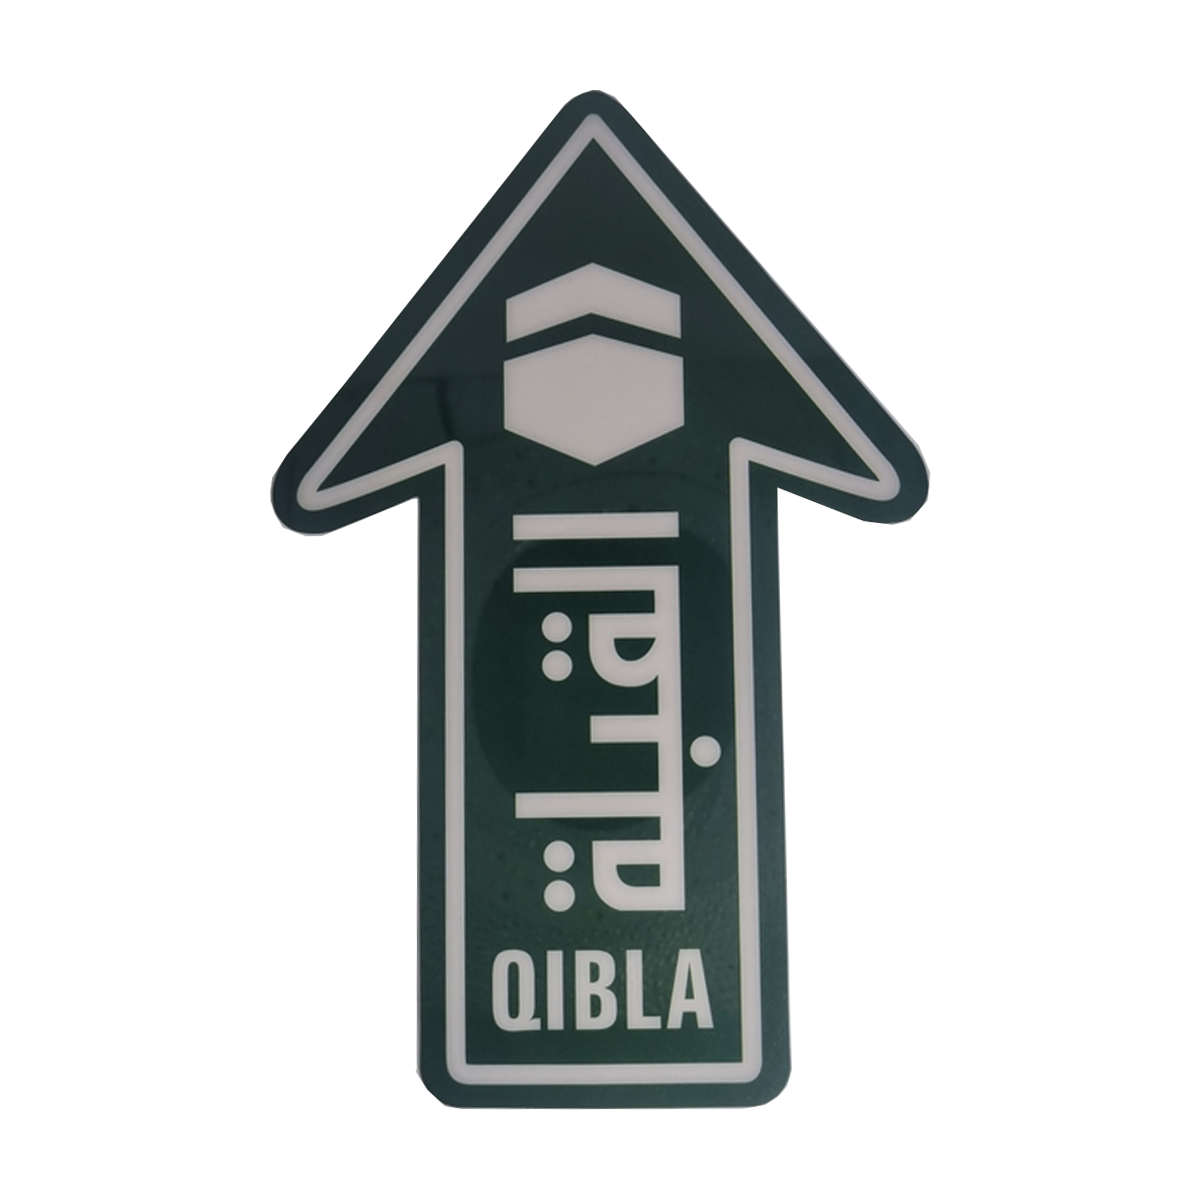 Qibla Sign  on Hard PVC With Peel Off Sticker 20x13 Cms Green/White